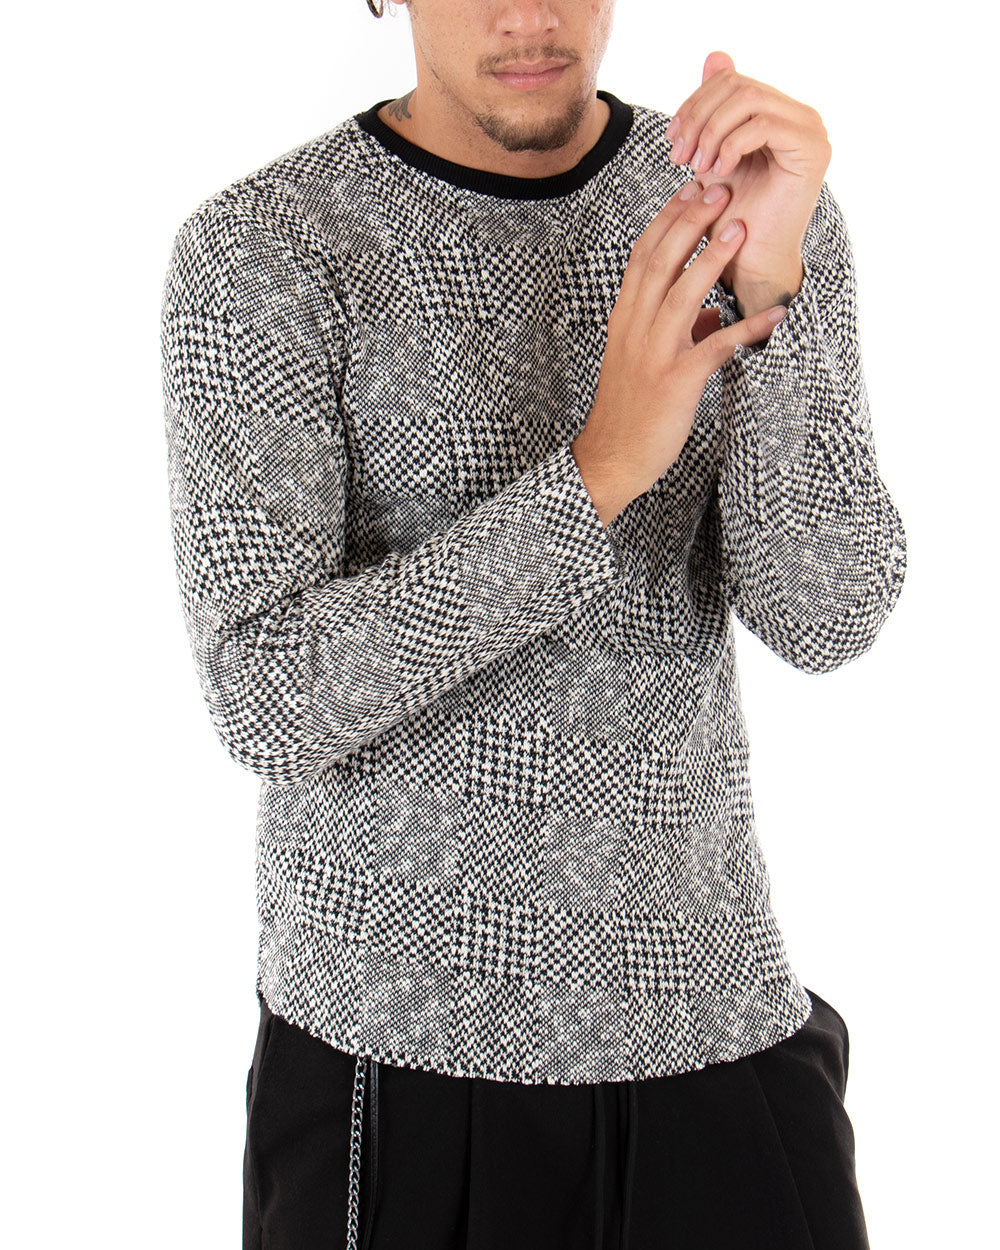 Men's Long Sleeves Multicolored Perforated Crew Neck Sweater GIOSAL